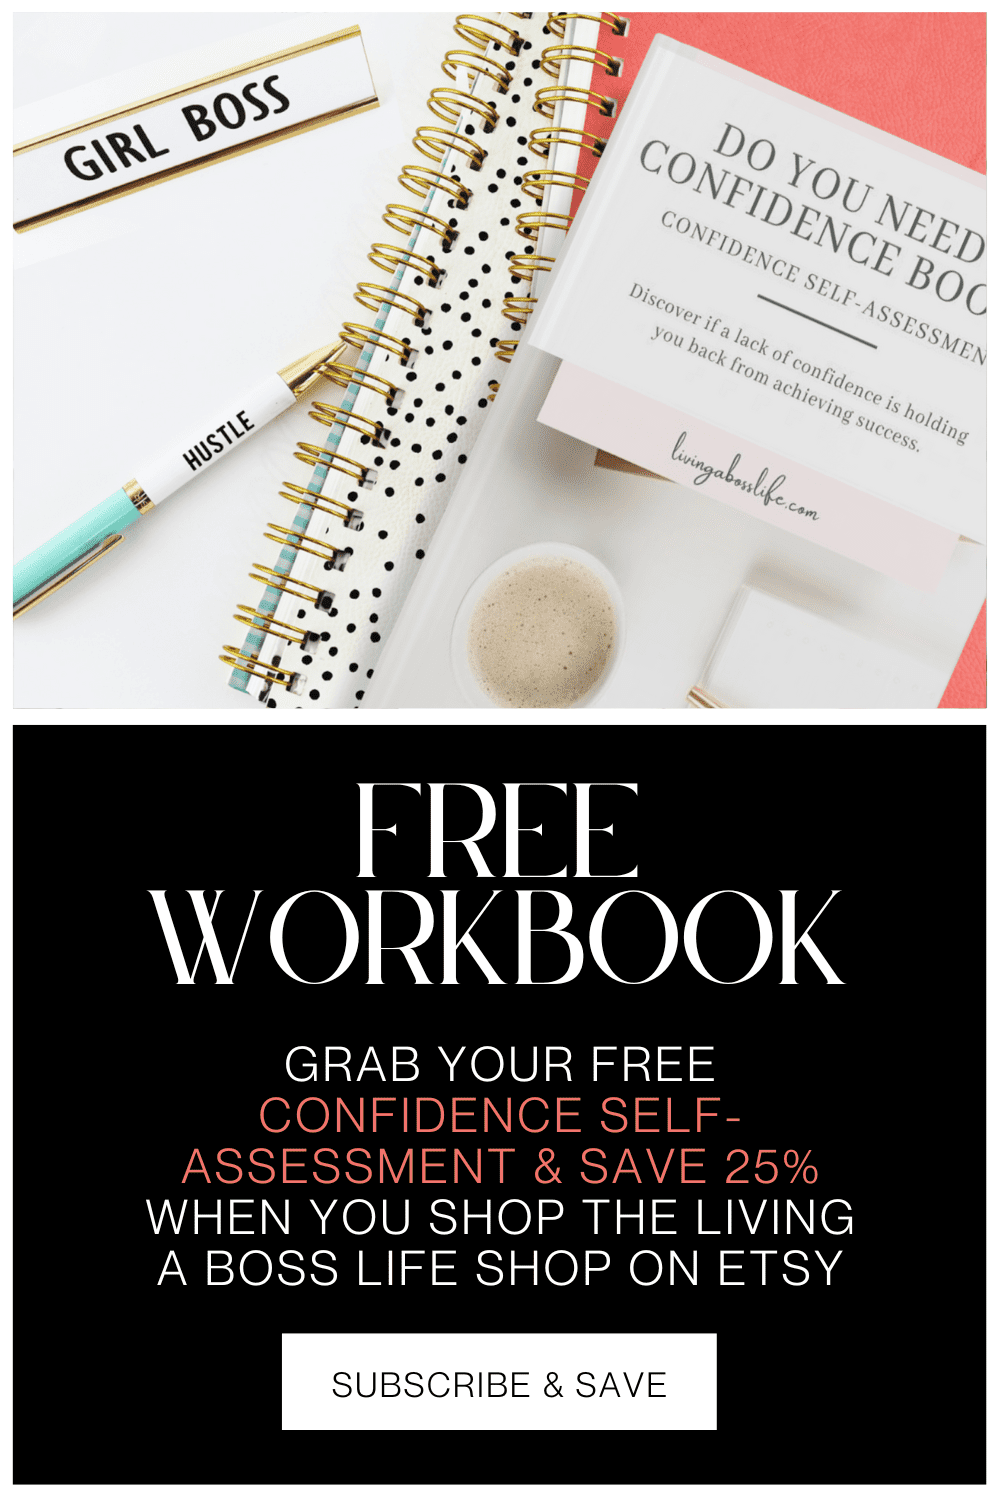 Grab a copy of our free confidence self-assessment and receive 25% off anything in our Etsy shop including the Confidence Builder Workbook! Subscribe & Save & enjoy great tips straight to your inbox.